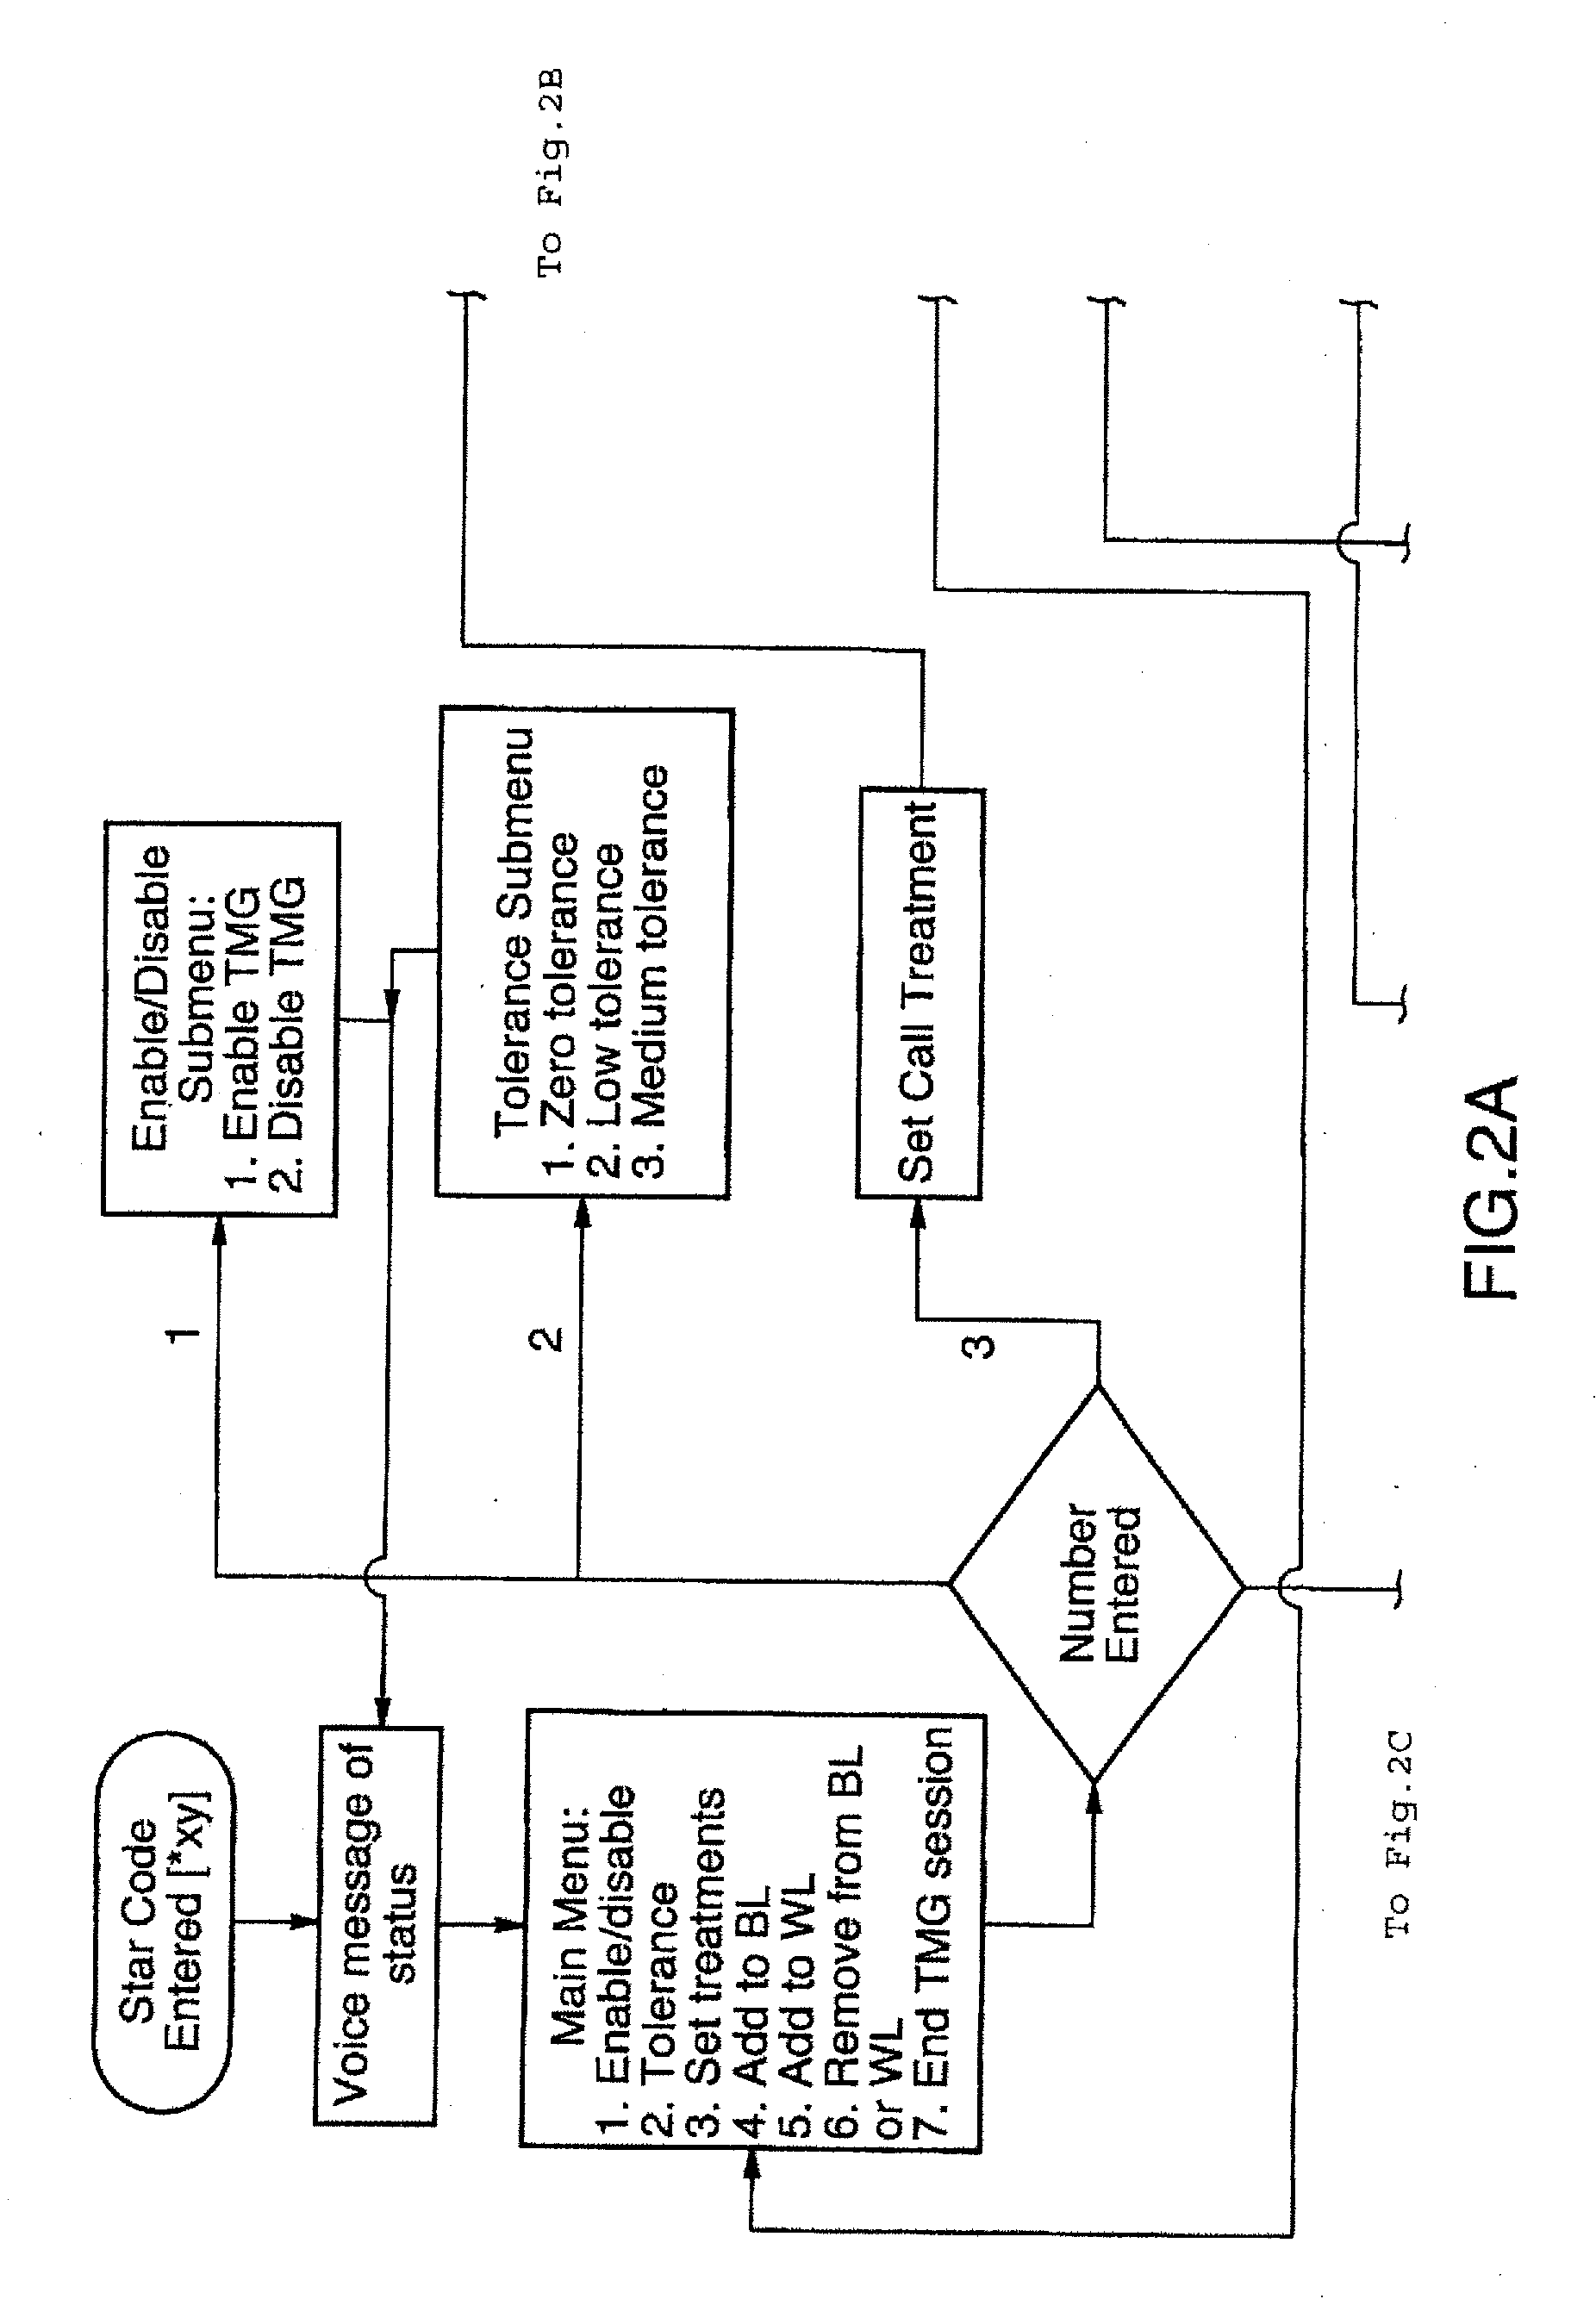 Call Screening System and Method